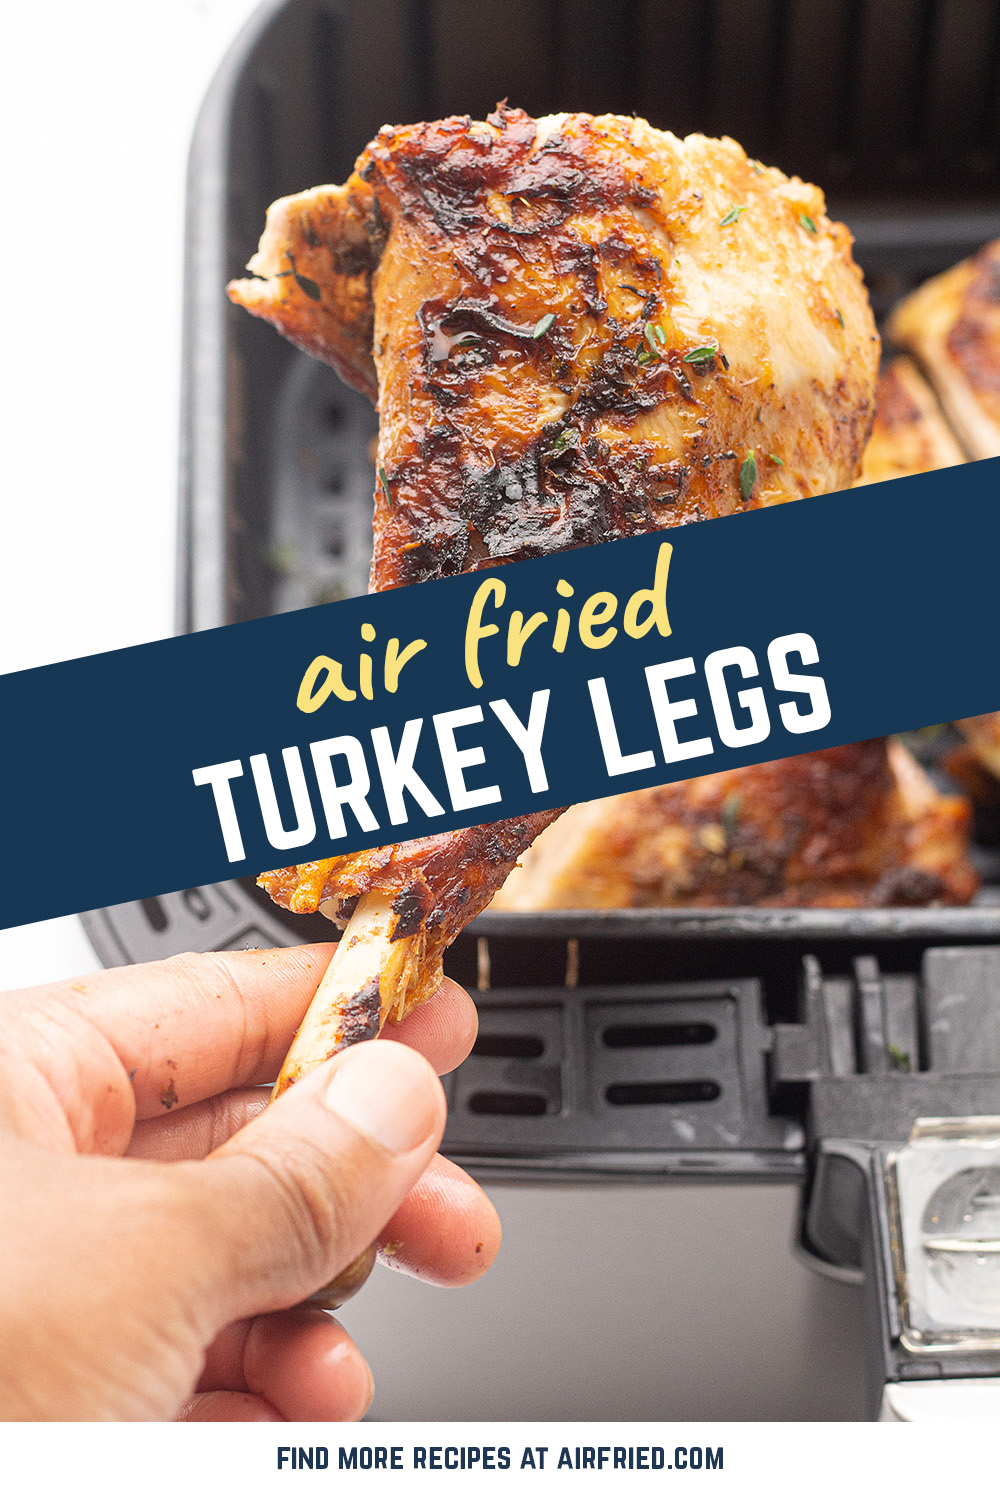 If you cook your turkey legs in an air fryer you will get crispy skin, and tender dark meat that is perfectly cooked!